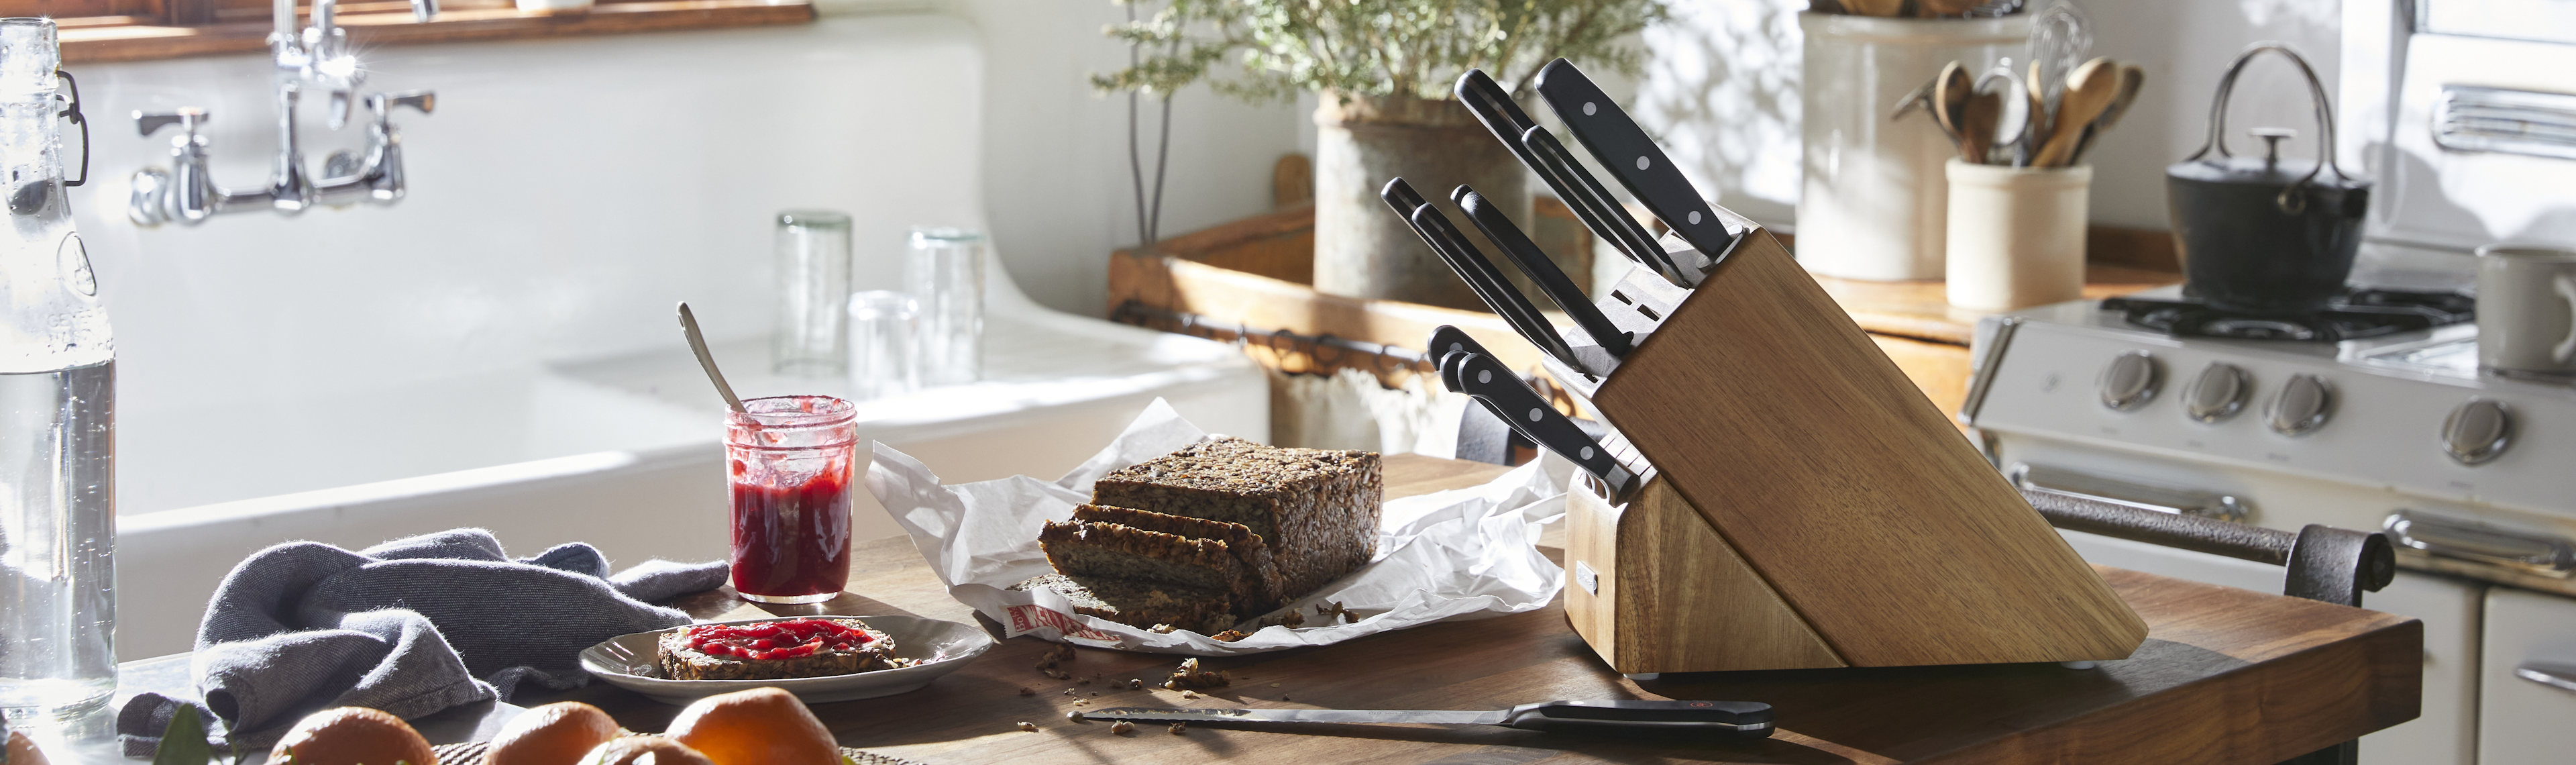 WUSTHOF knife block on a kitchen island surrounded by fresh food.